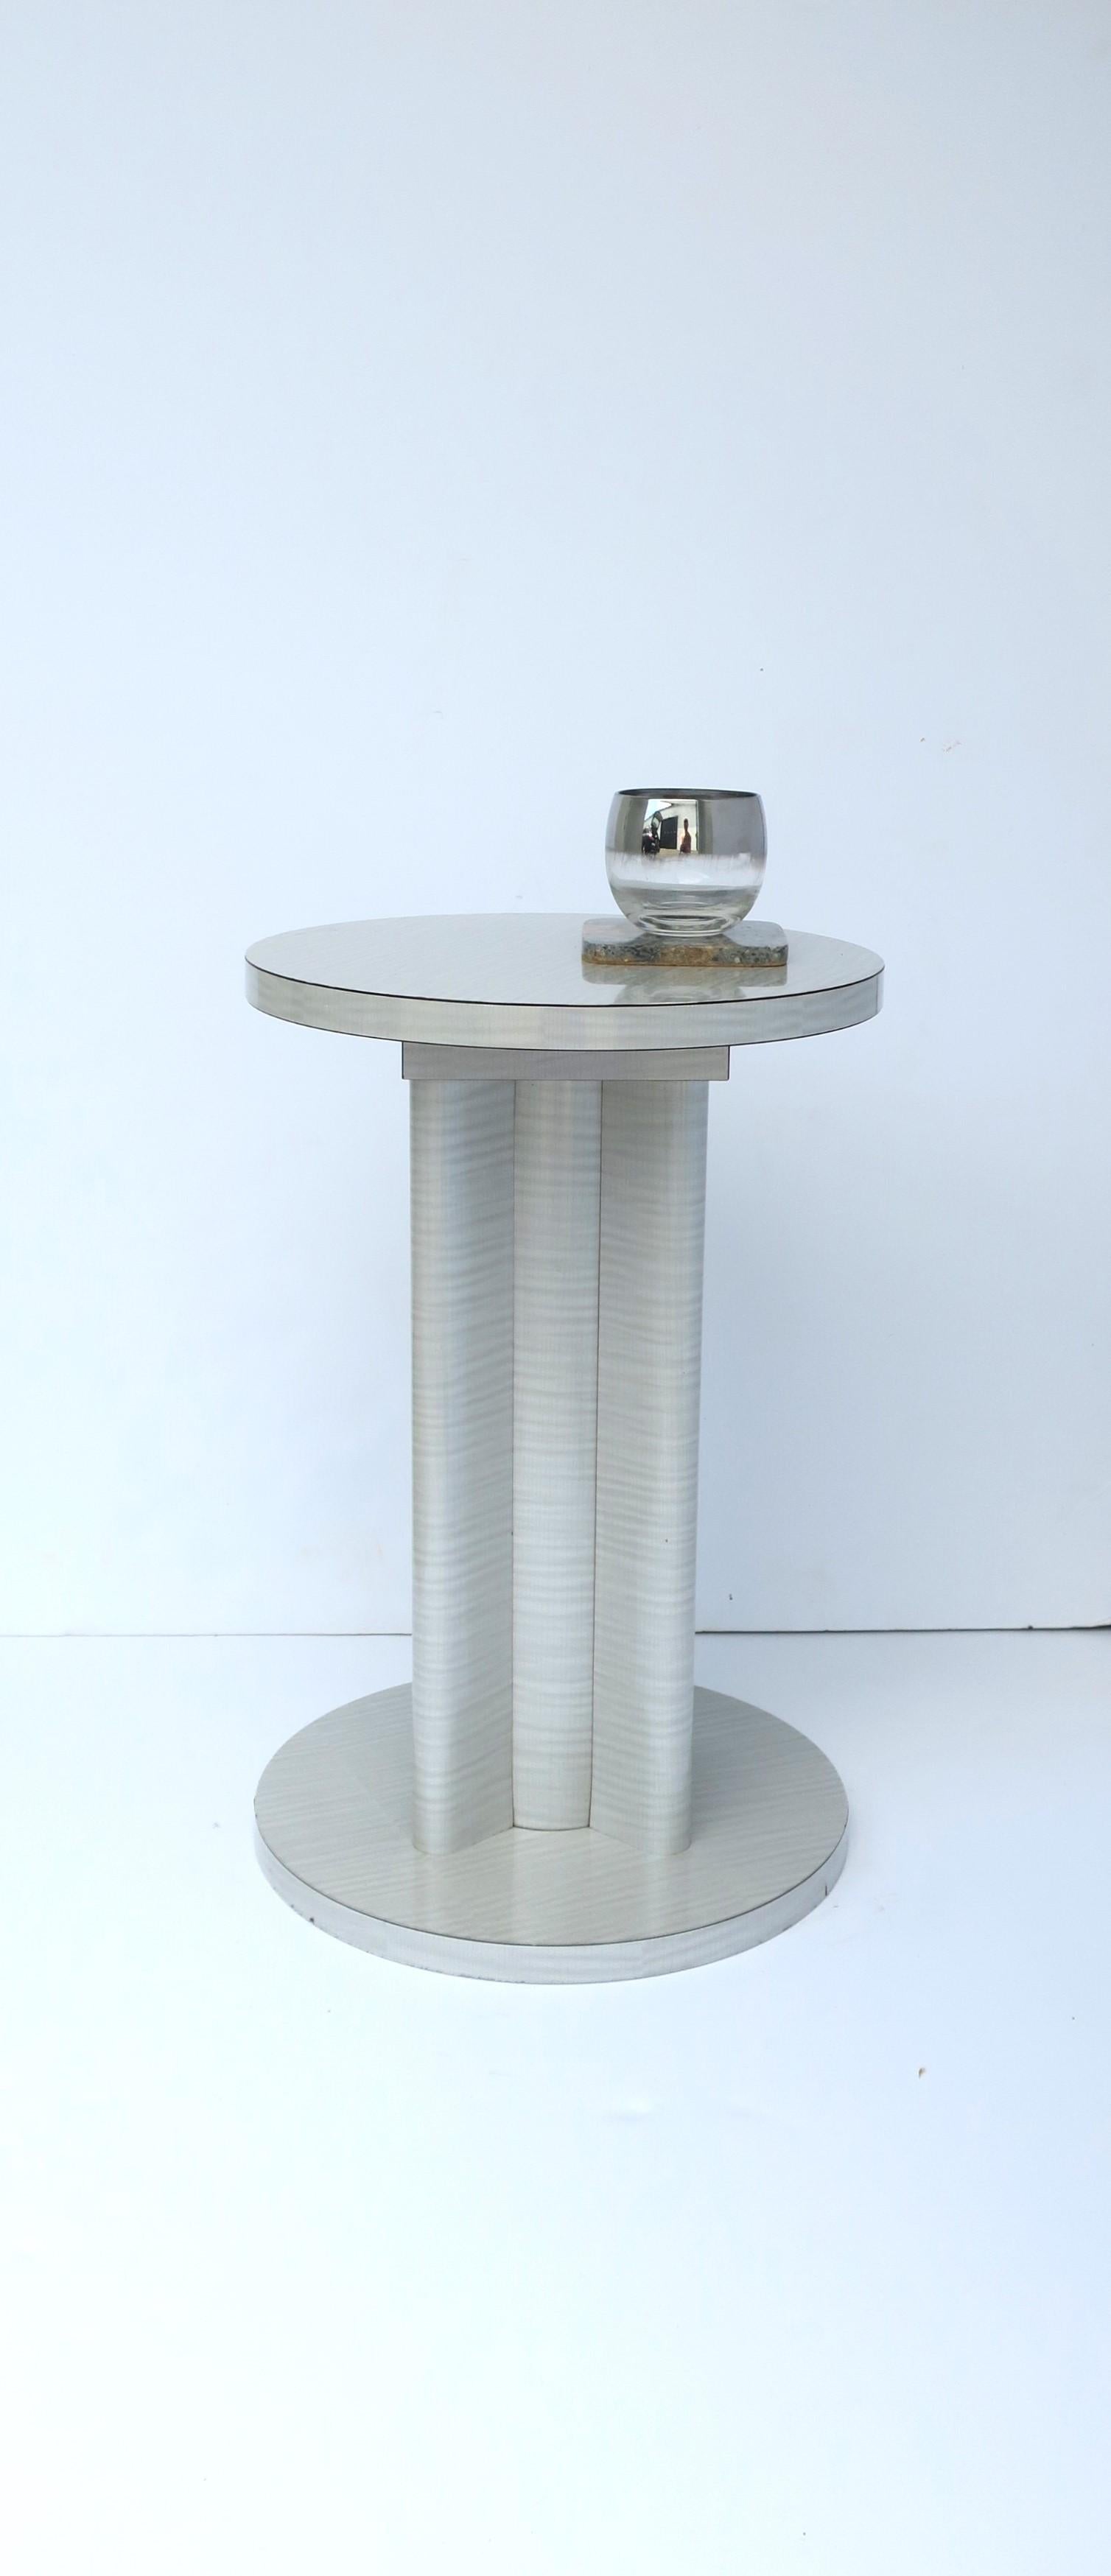 Late 20th Century Art Deco Revival Modern Drinks Side Gueridon Table Silver Grey, circa 1970s For Sale